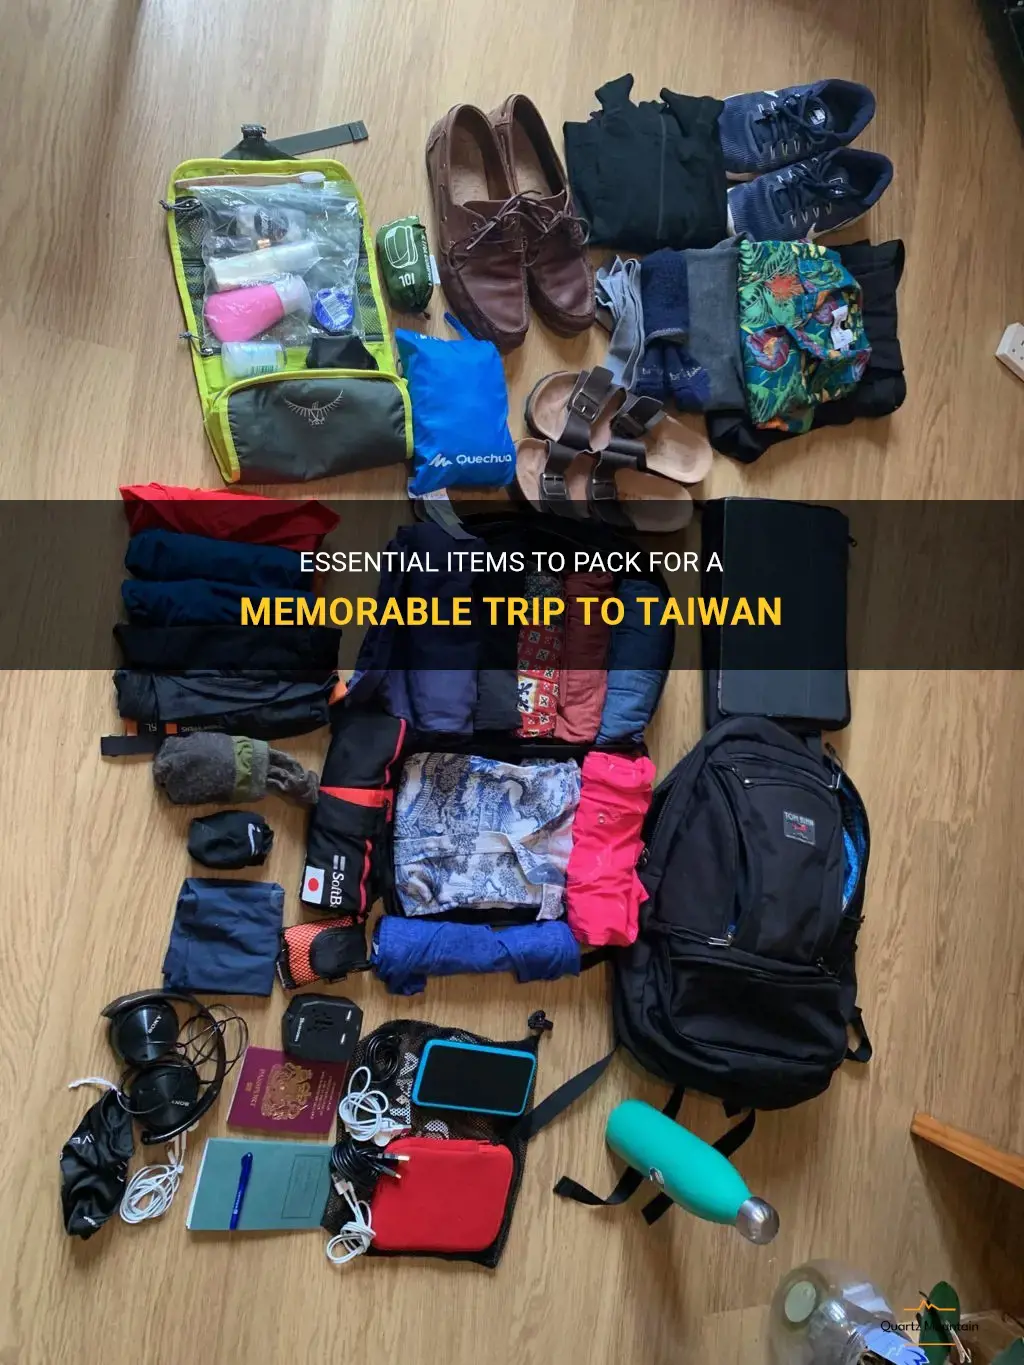 what should a tourist pack to go to taiwan